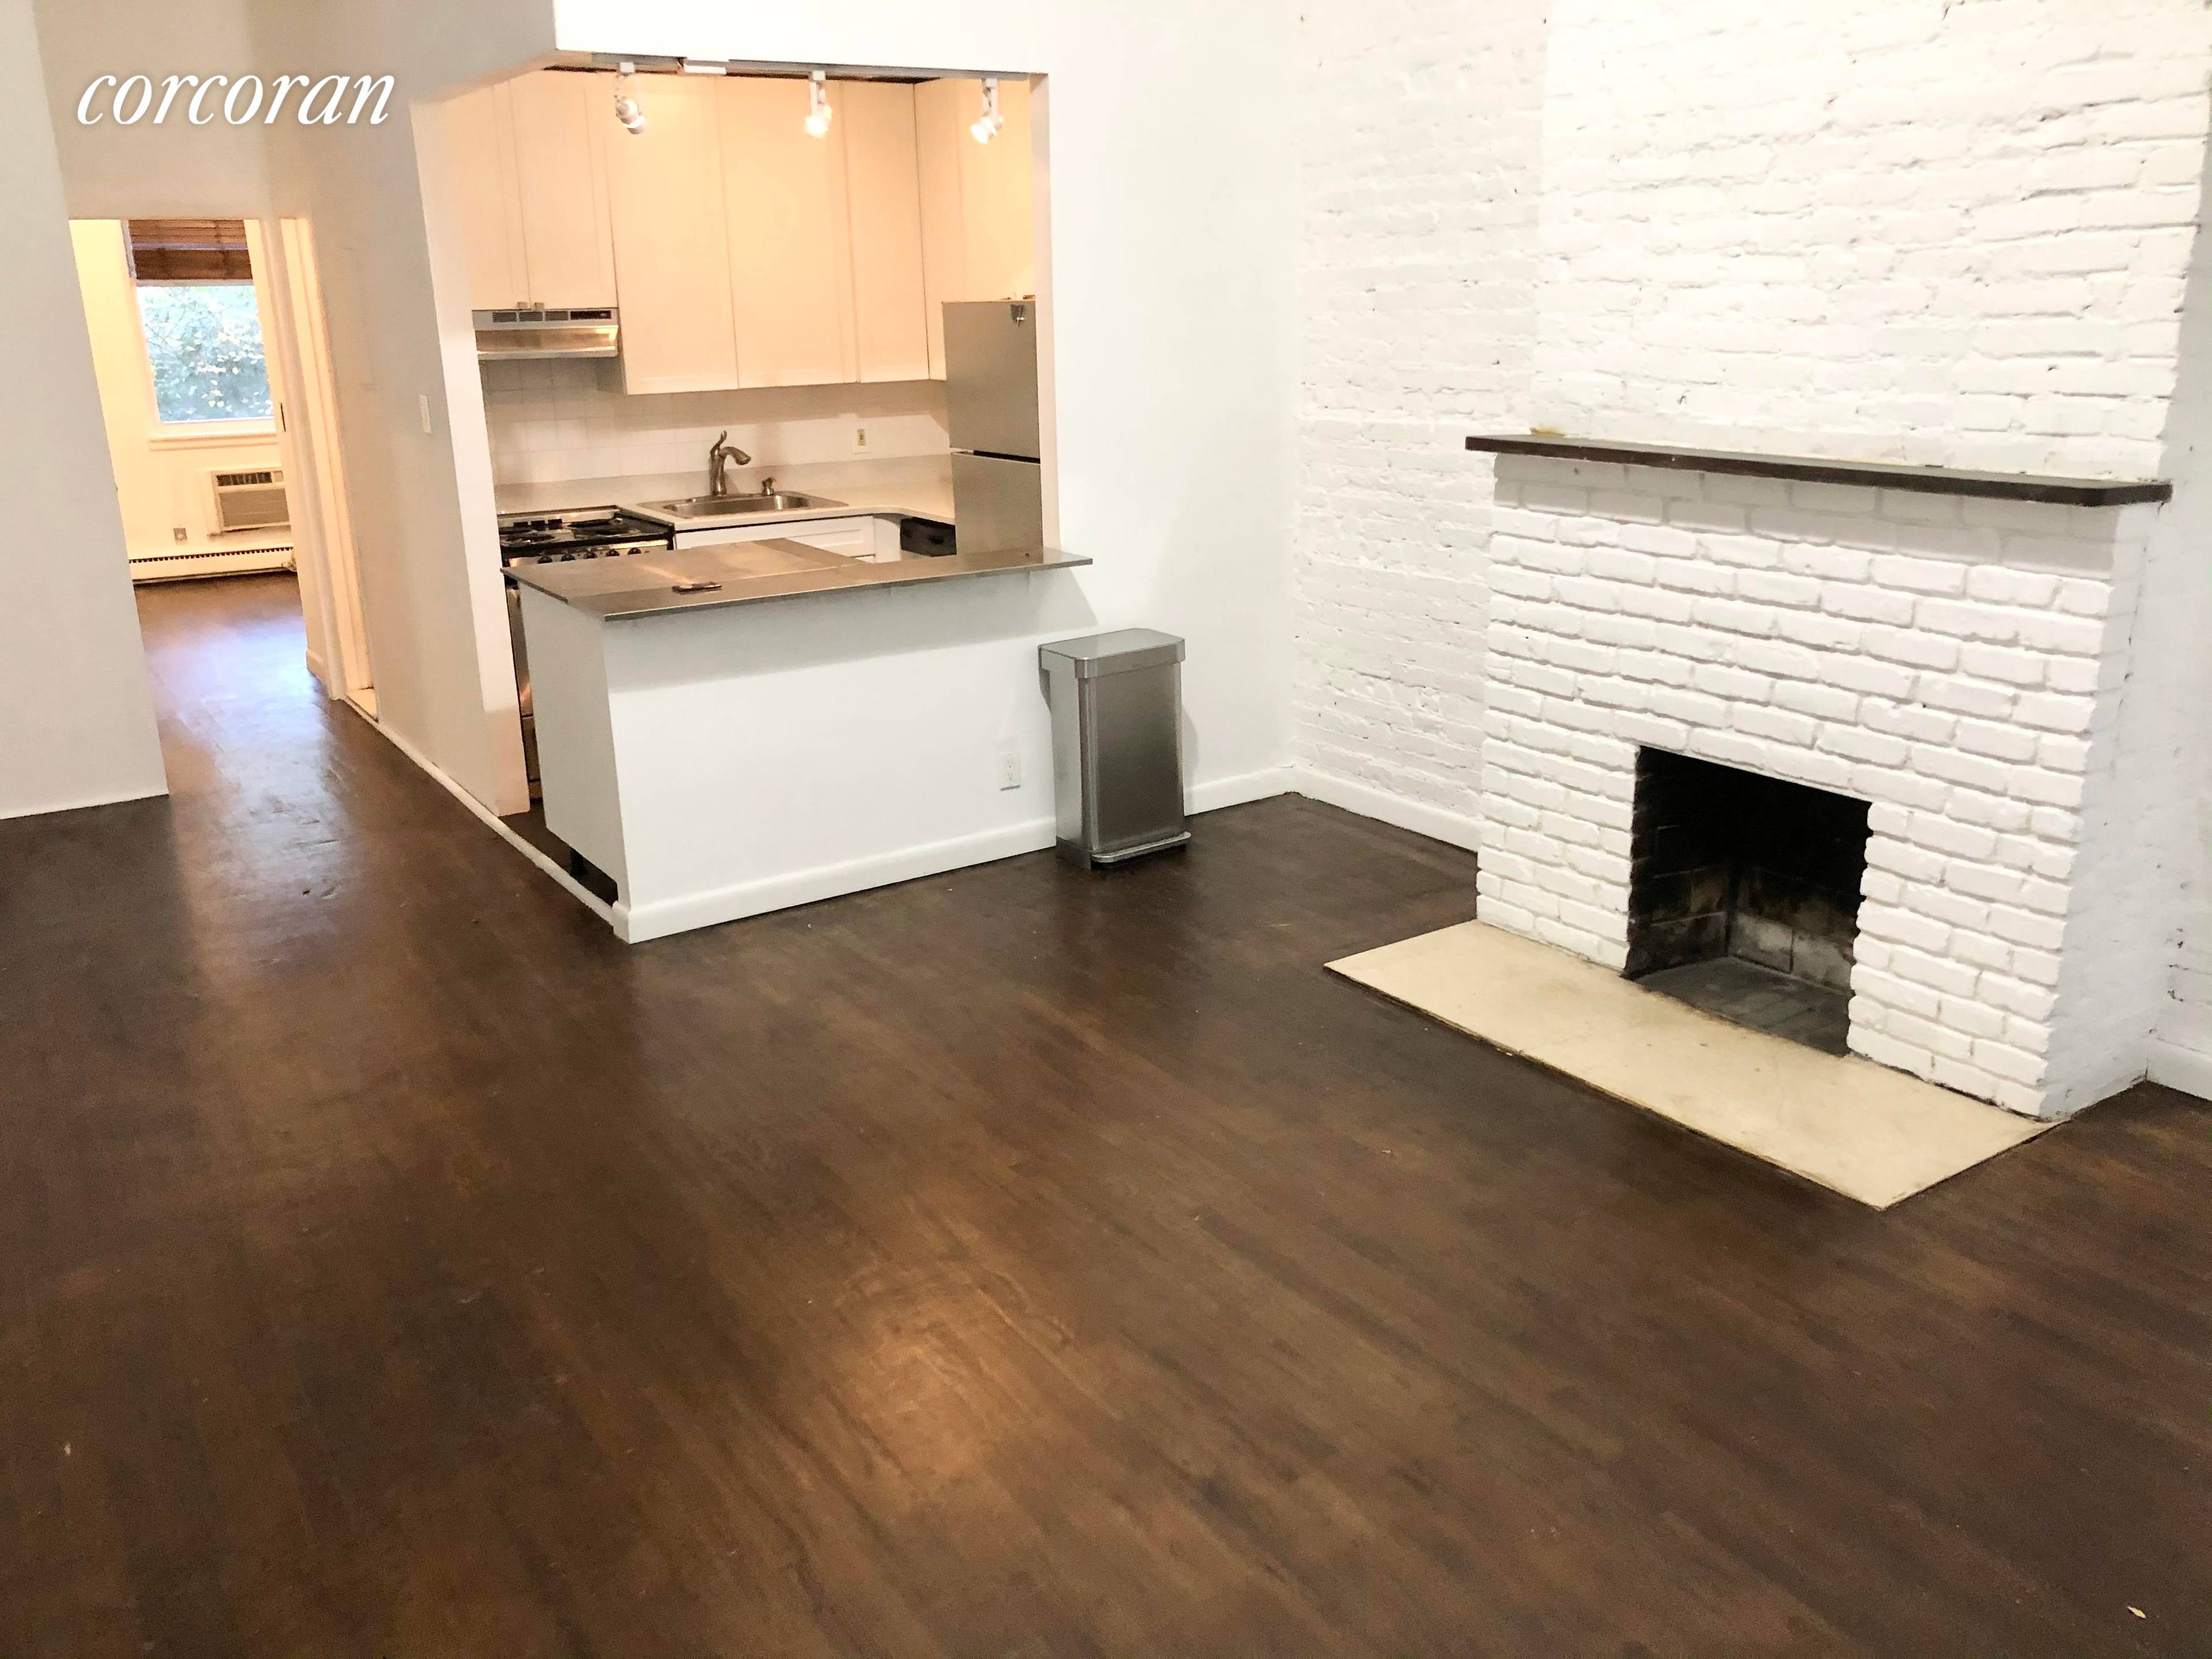 THIS APARTMENT IS NO FEE AND ONE MONTH FREE TO THE TENANT This is the gross rent 4, 700 month additionally you get one month free rent Huge Prime Chelsea ...